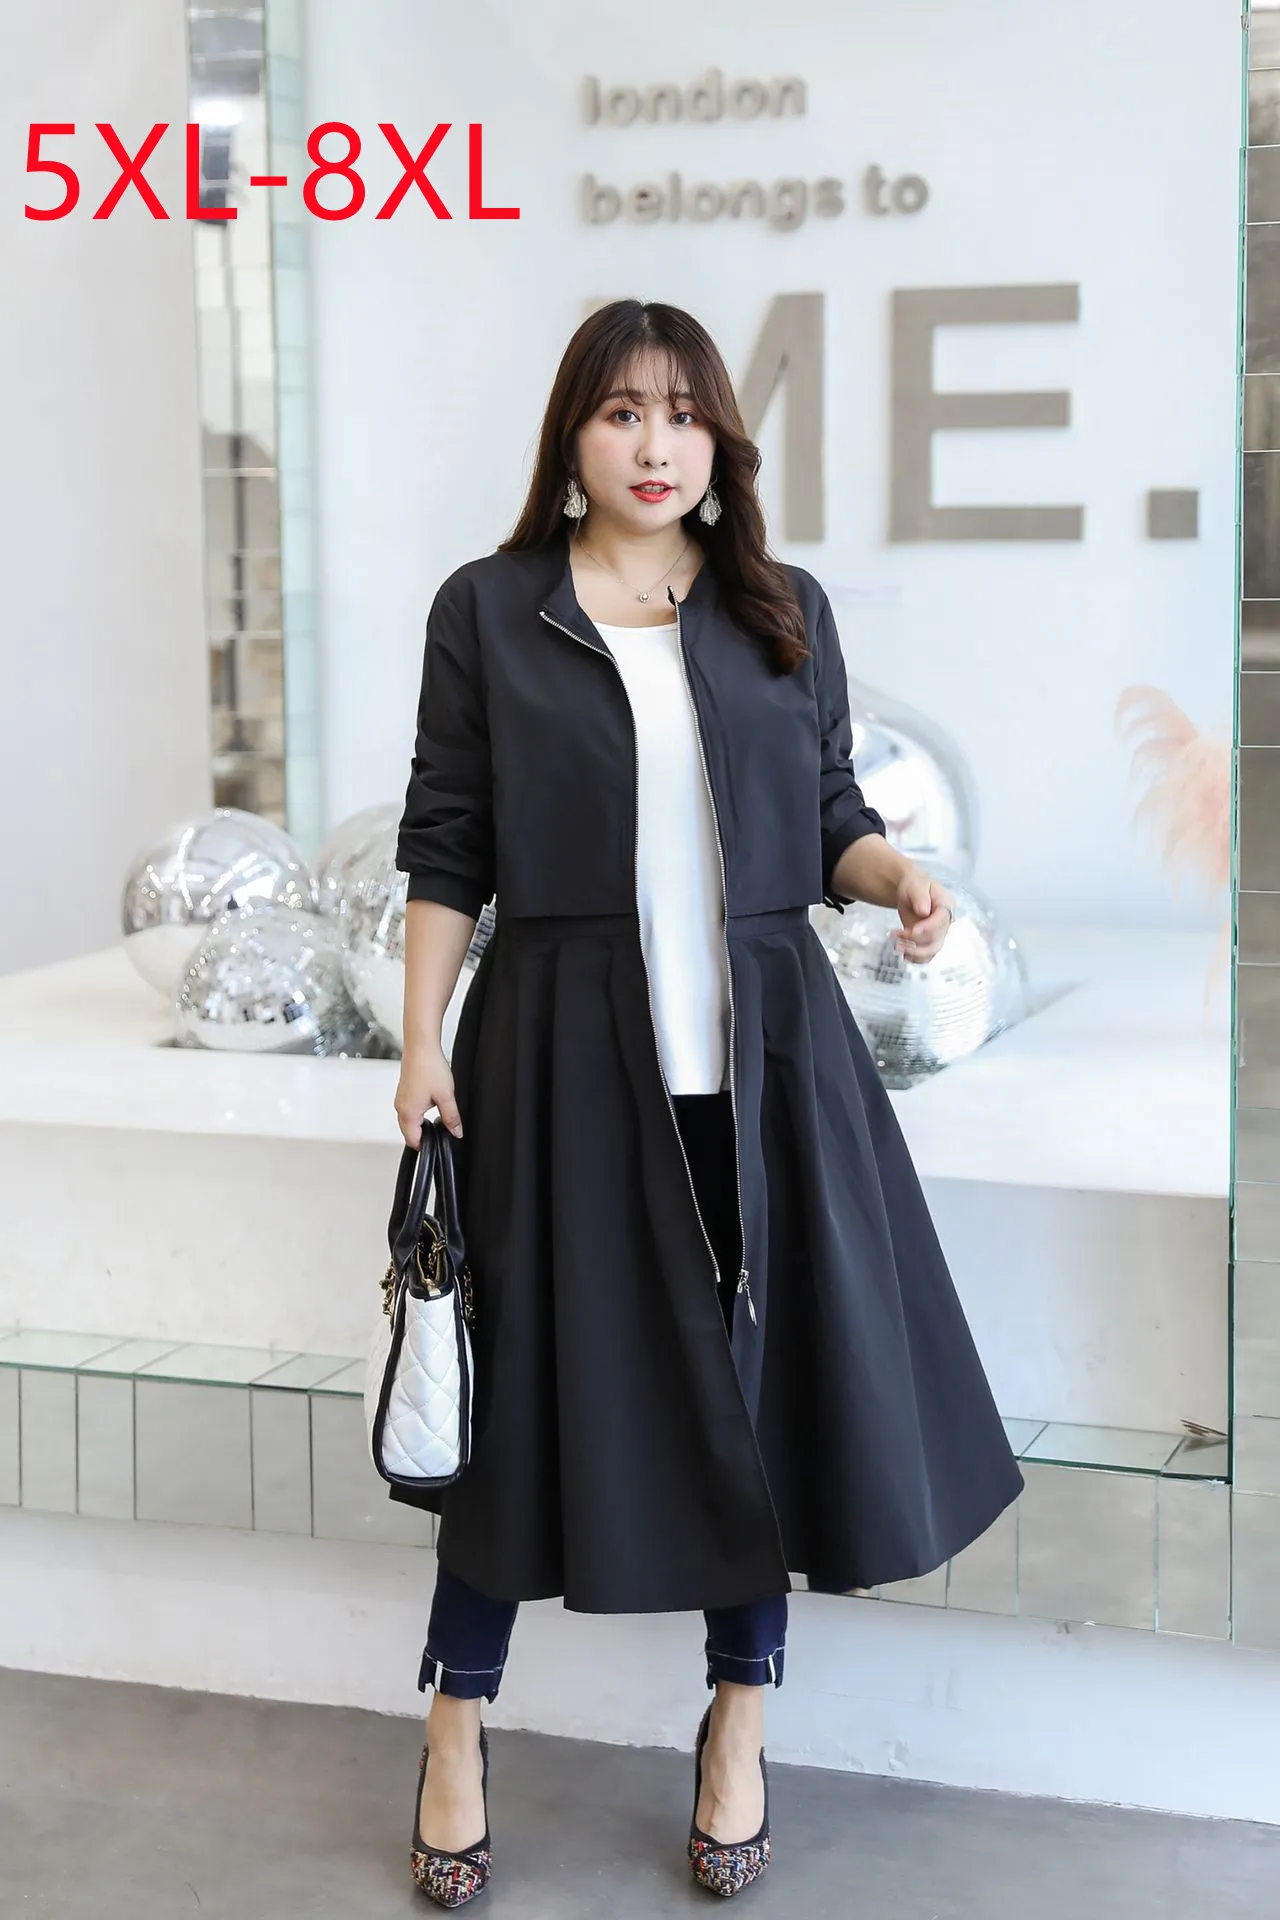 New 2022 Ladies Spring Autumn Plus Size Tops For Women Large Size Long Sleeve O-neck black Overcoat Coat 5XL 6XL 7XL 8XL